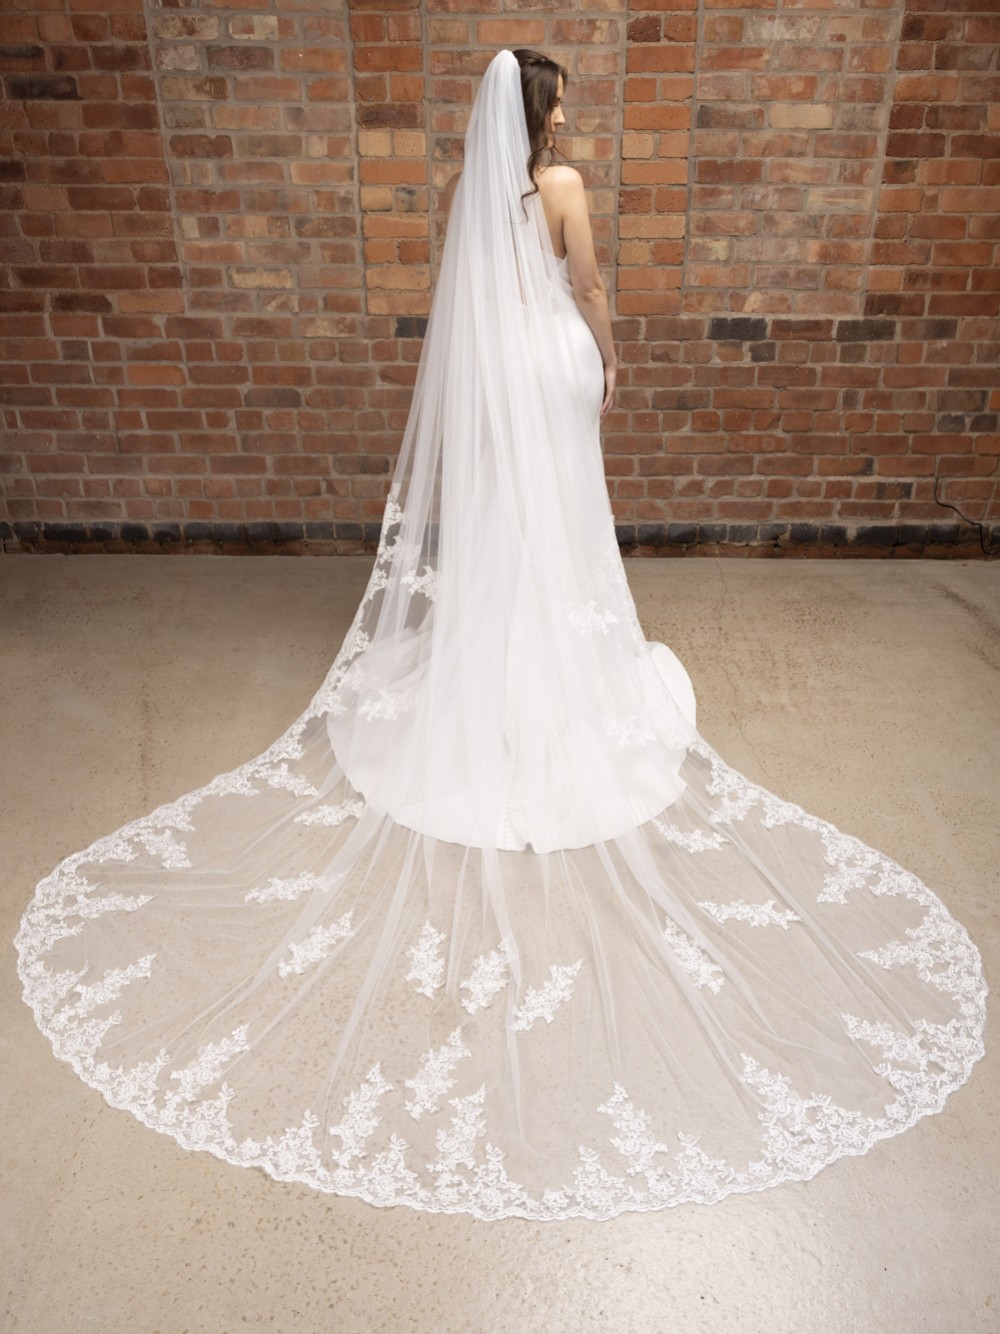 Photograph: Perfect Bridal Ivory Single Tier Corded Lace Cathedral Veil with Motifs